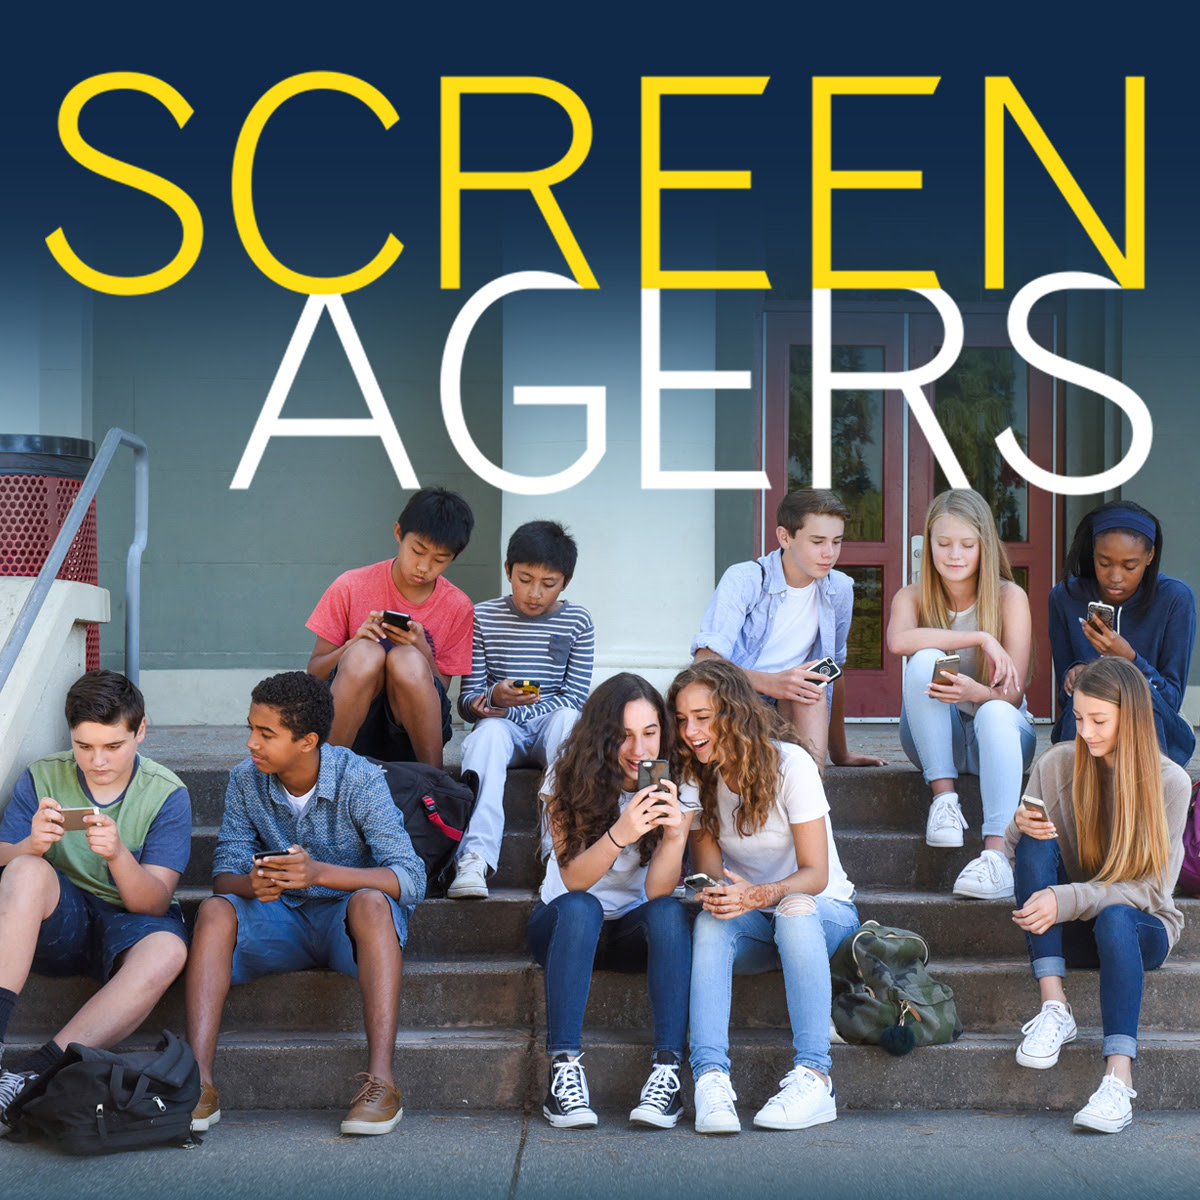 Screenagers Film Presented By California Middle School